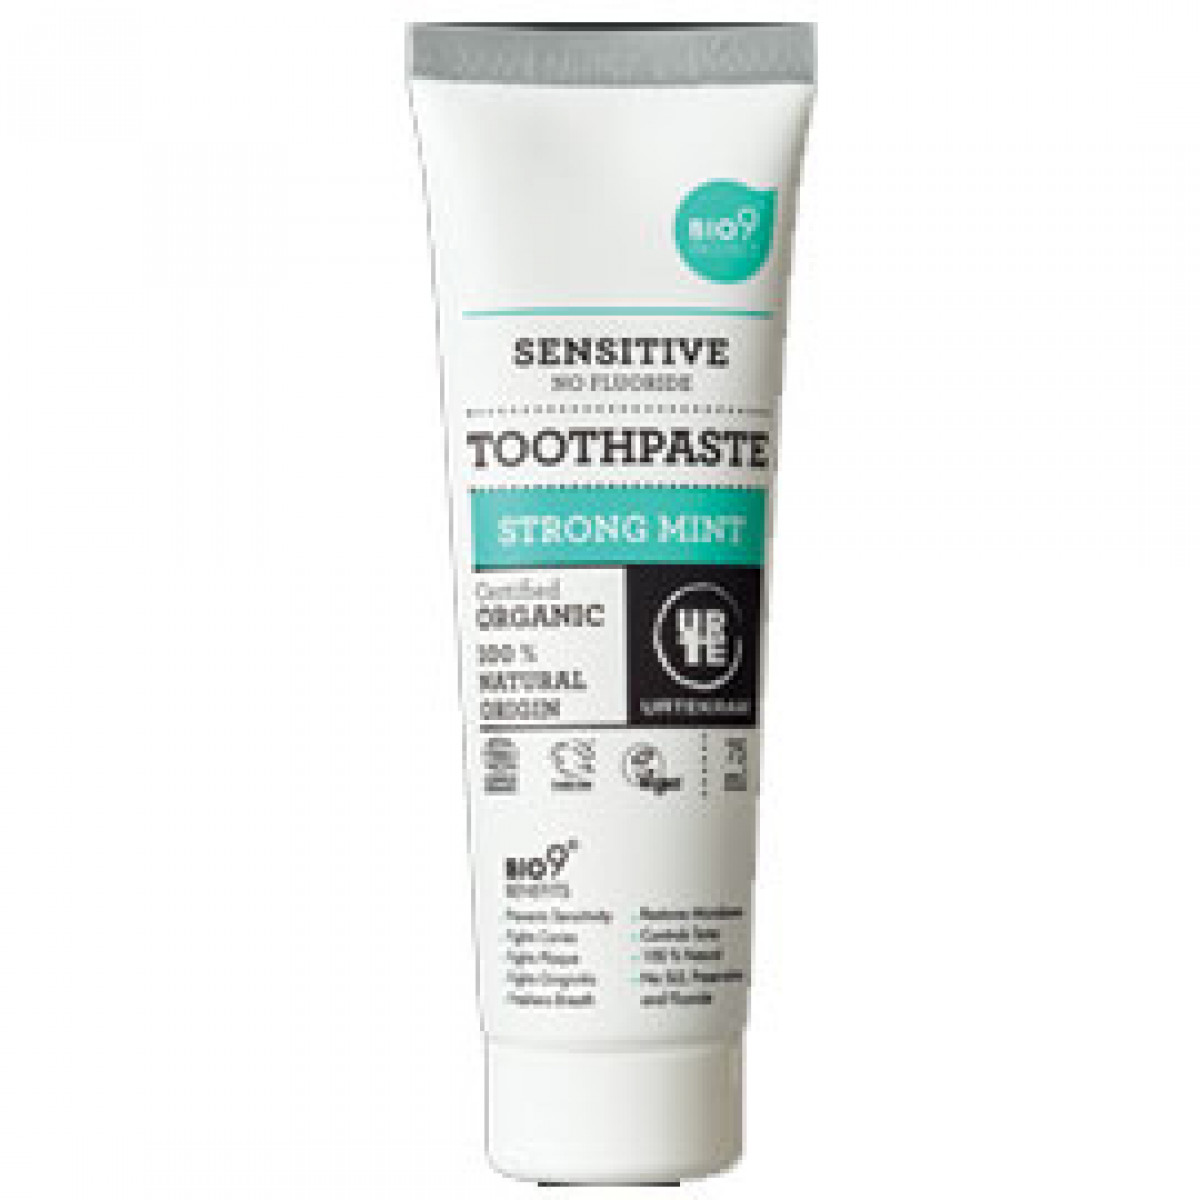 Product picture for Bio 9 Toothpaste Strong Mint (Sensitive)